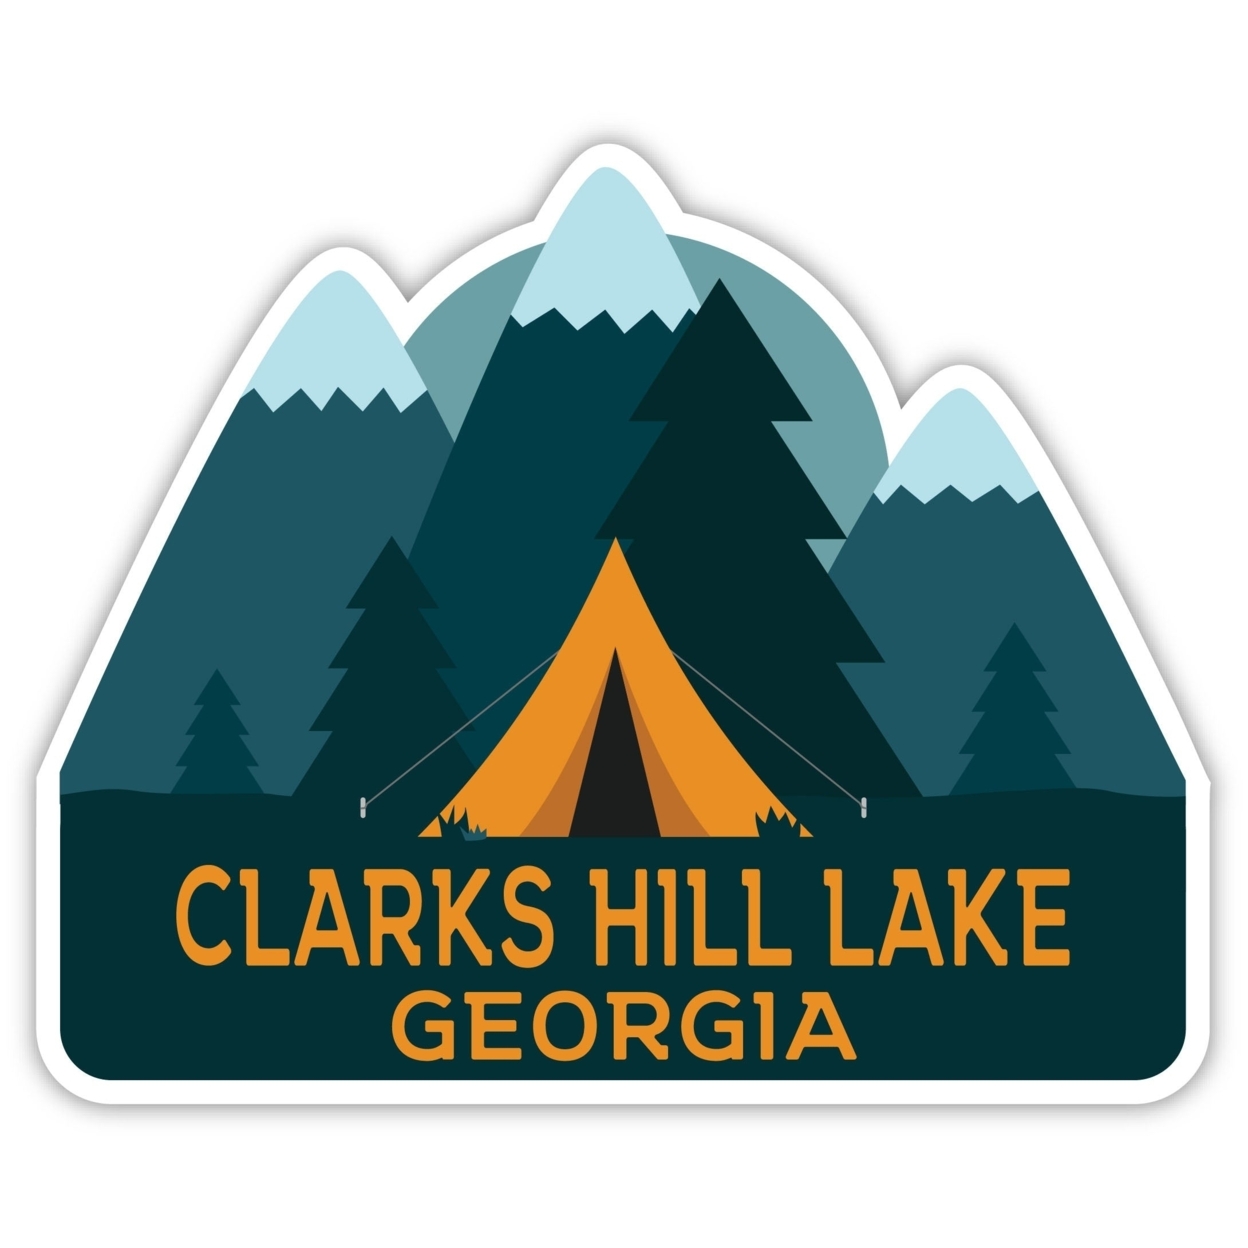 Clarks Hill Lake Georgia Souvenir Decorative Stickers (Choose Theme And Size) - 4-Pack, 8-Inch, Tent